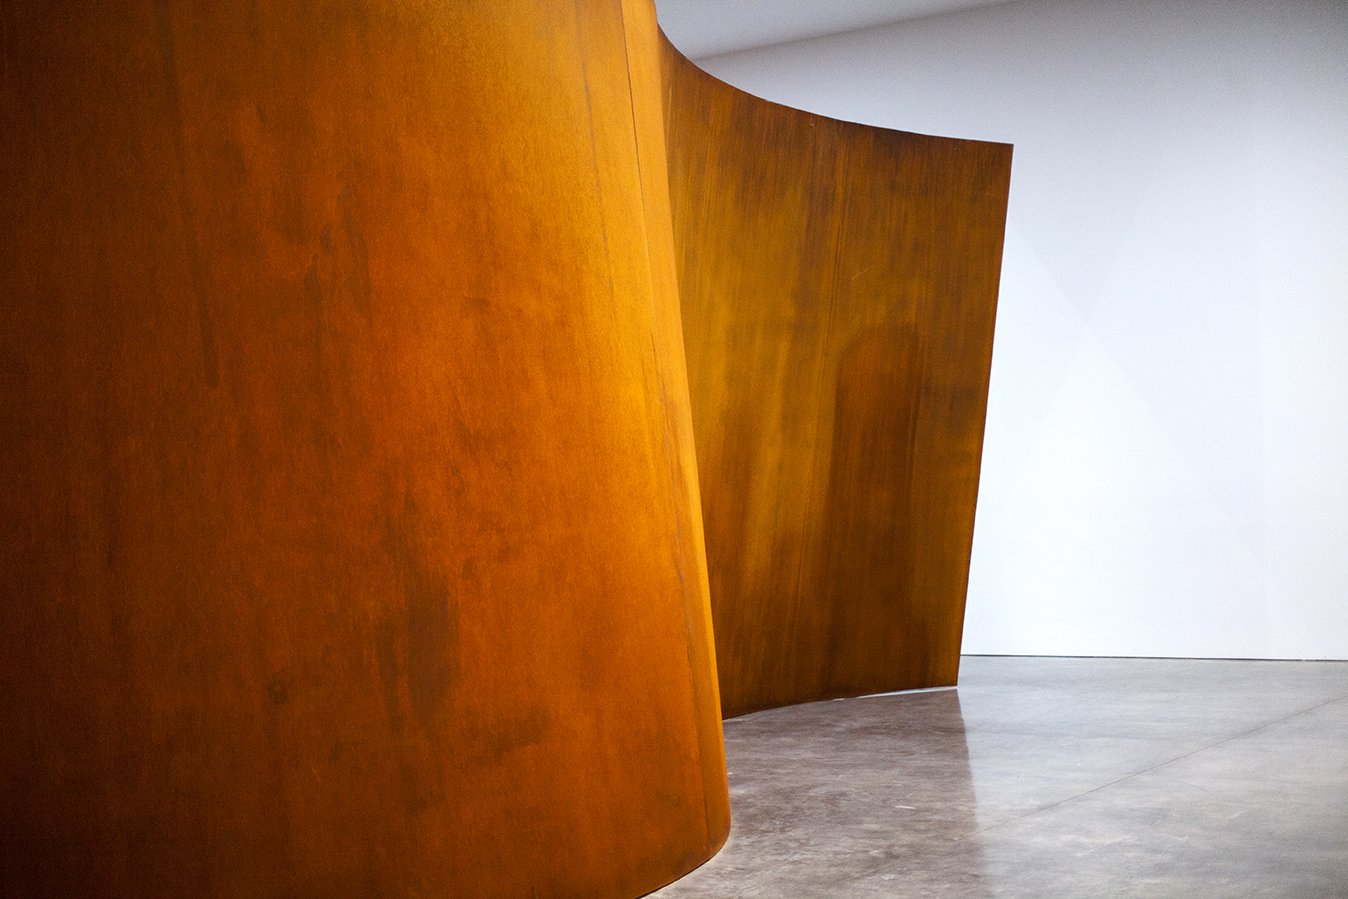 Richard Serra, Inside Out, 2013. Weatherproof steel. Courtesy of the artist and Gagosian Gallery, New York.